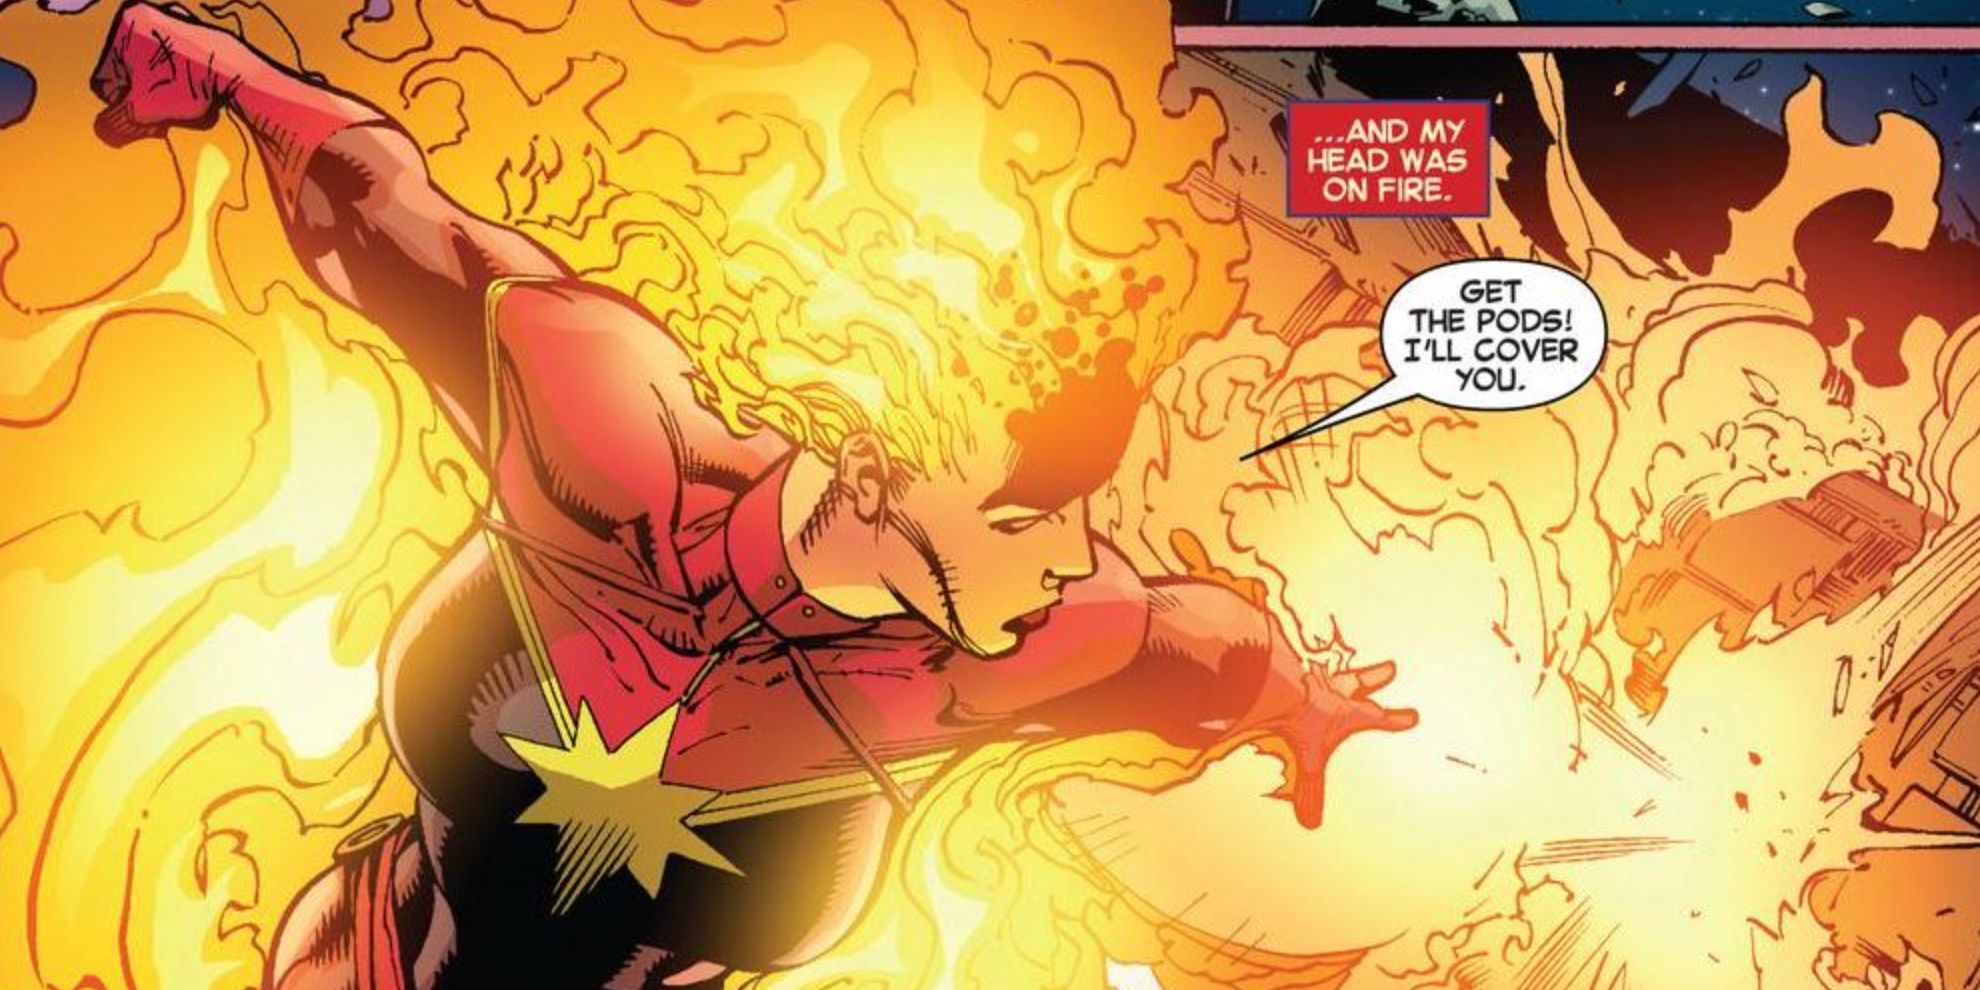 Captain Marvel with enough Binary energy to set her head on fire in Marvel comics